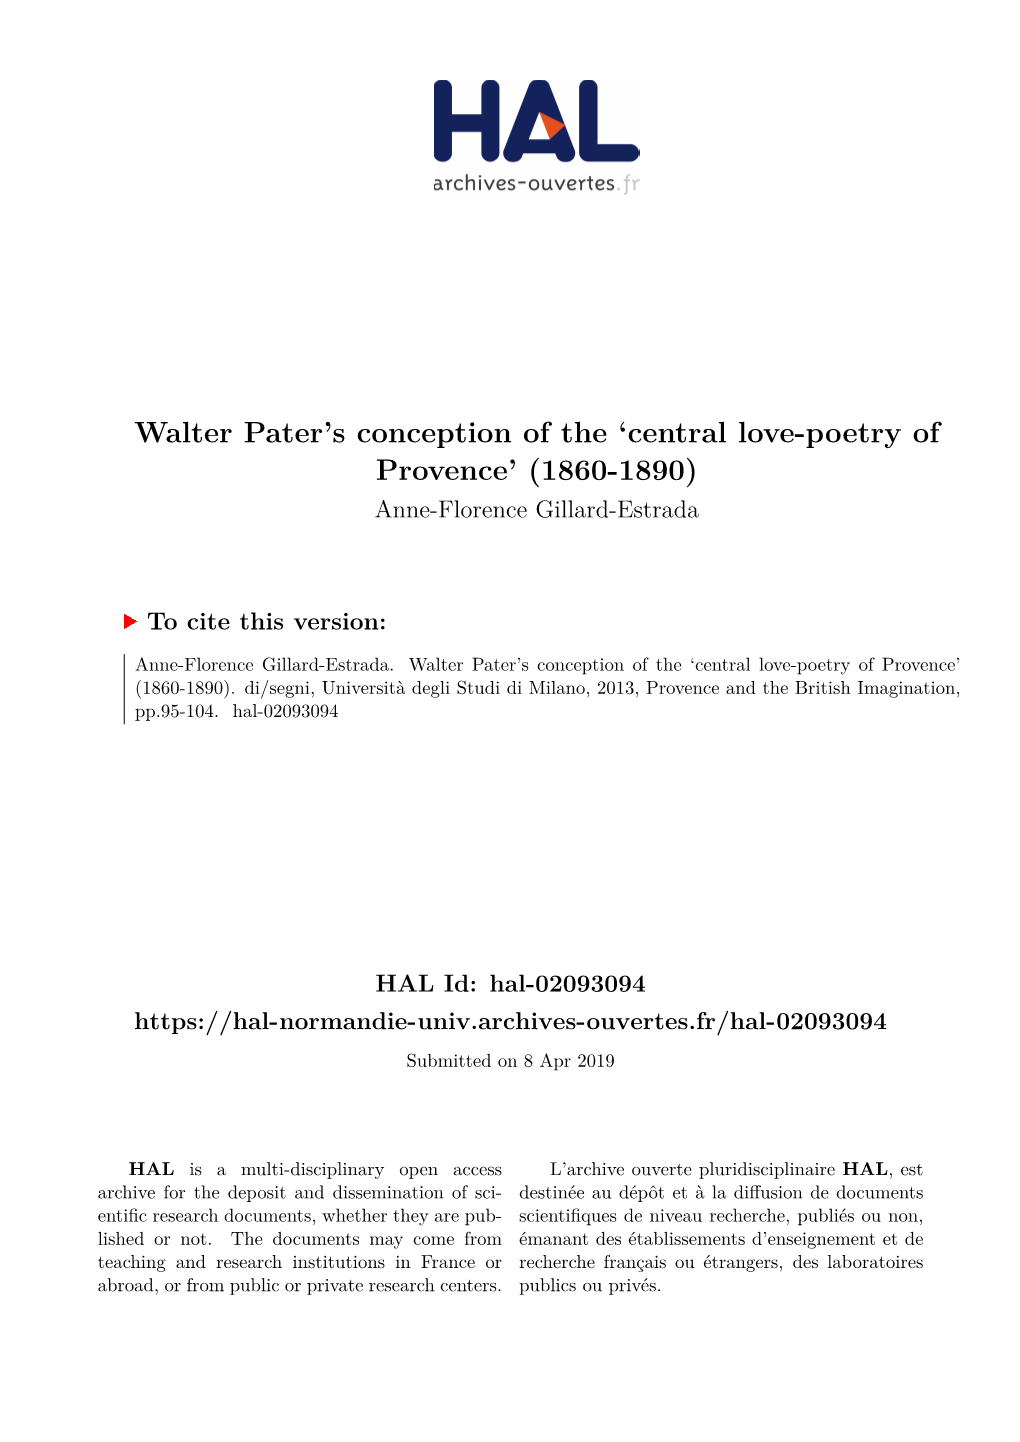 Walter Pater's Conception of the 'Central Love-Poetry of Provence'